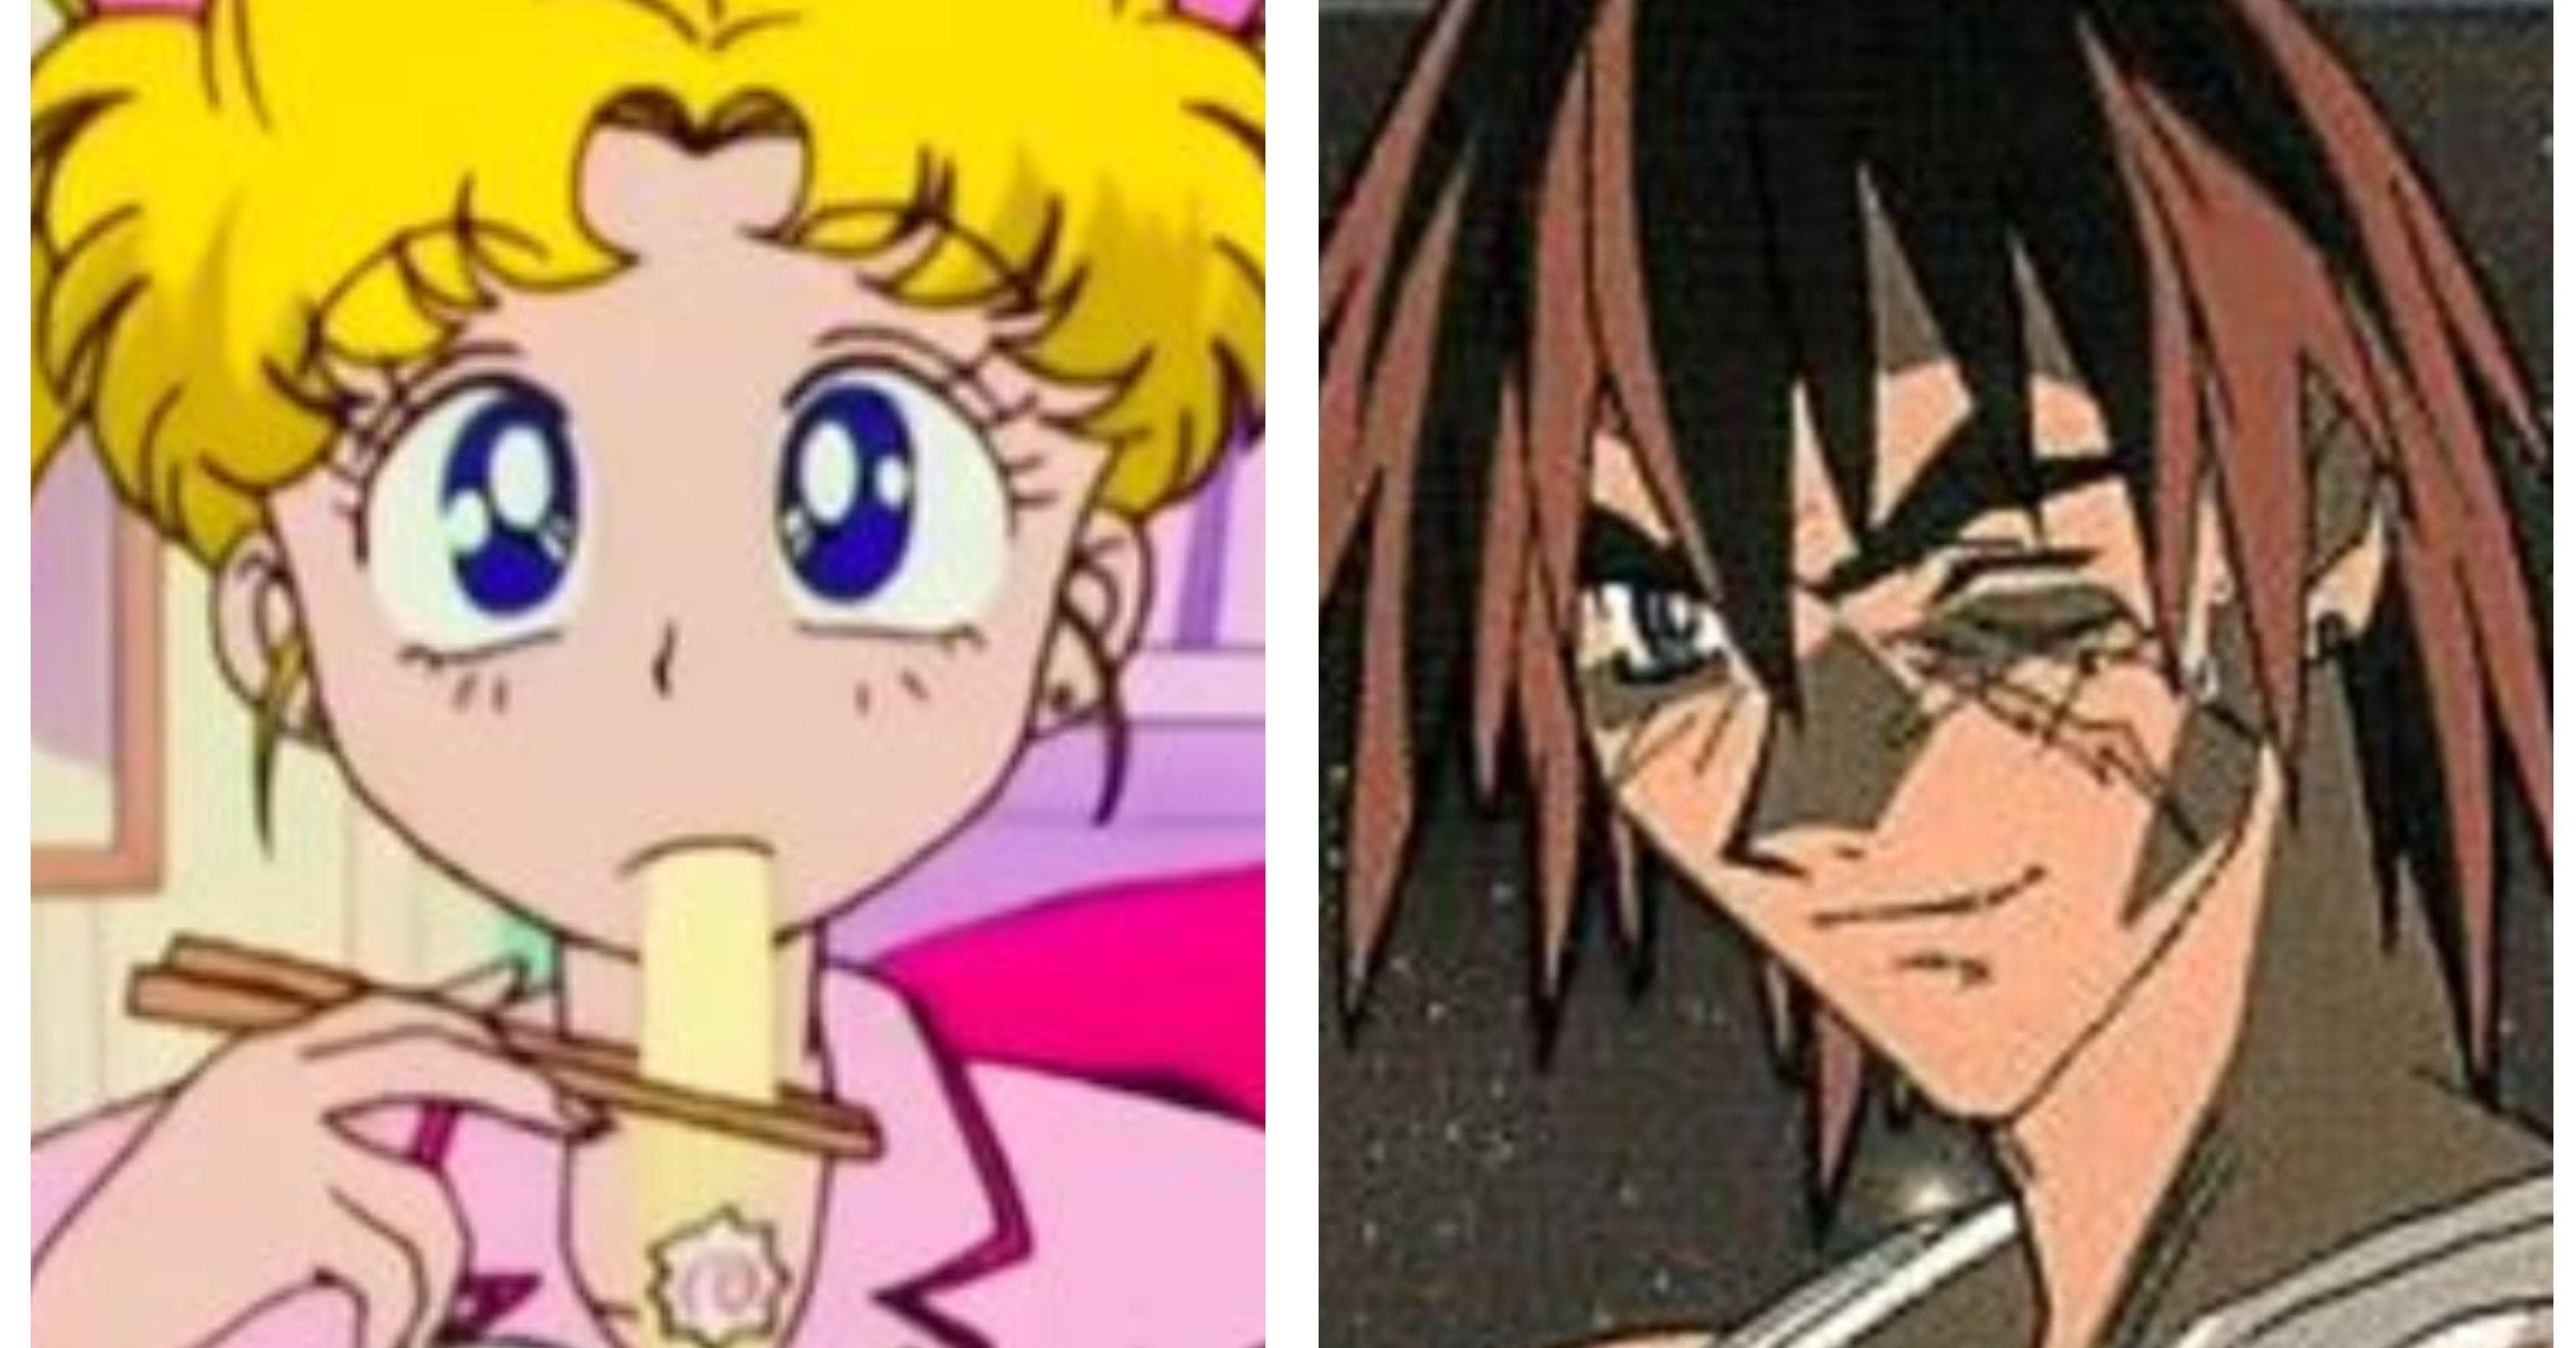 Which Old School Anime Protagonist Are You Based On Your Zodiac Sign?